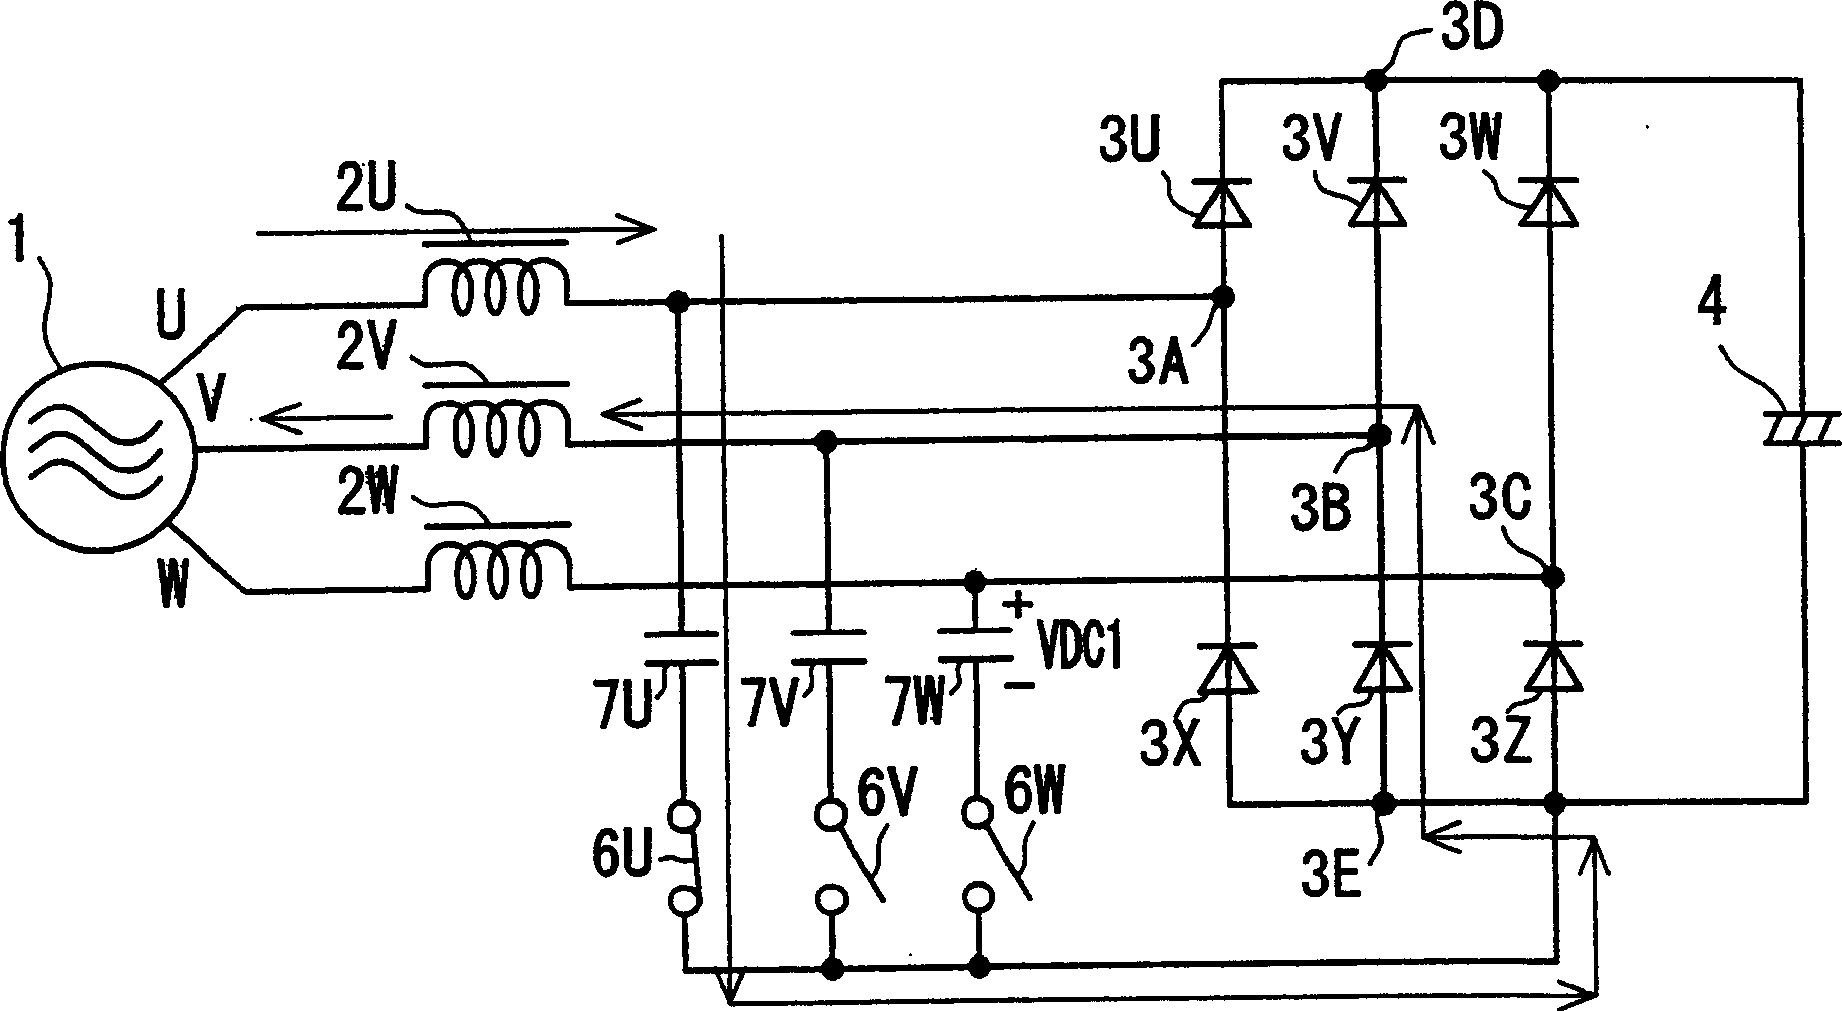 Direct current power supply apparatus and control method for the same, and a compressor drive apparatus